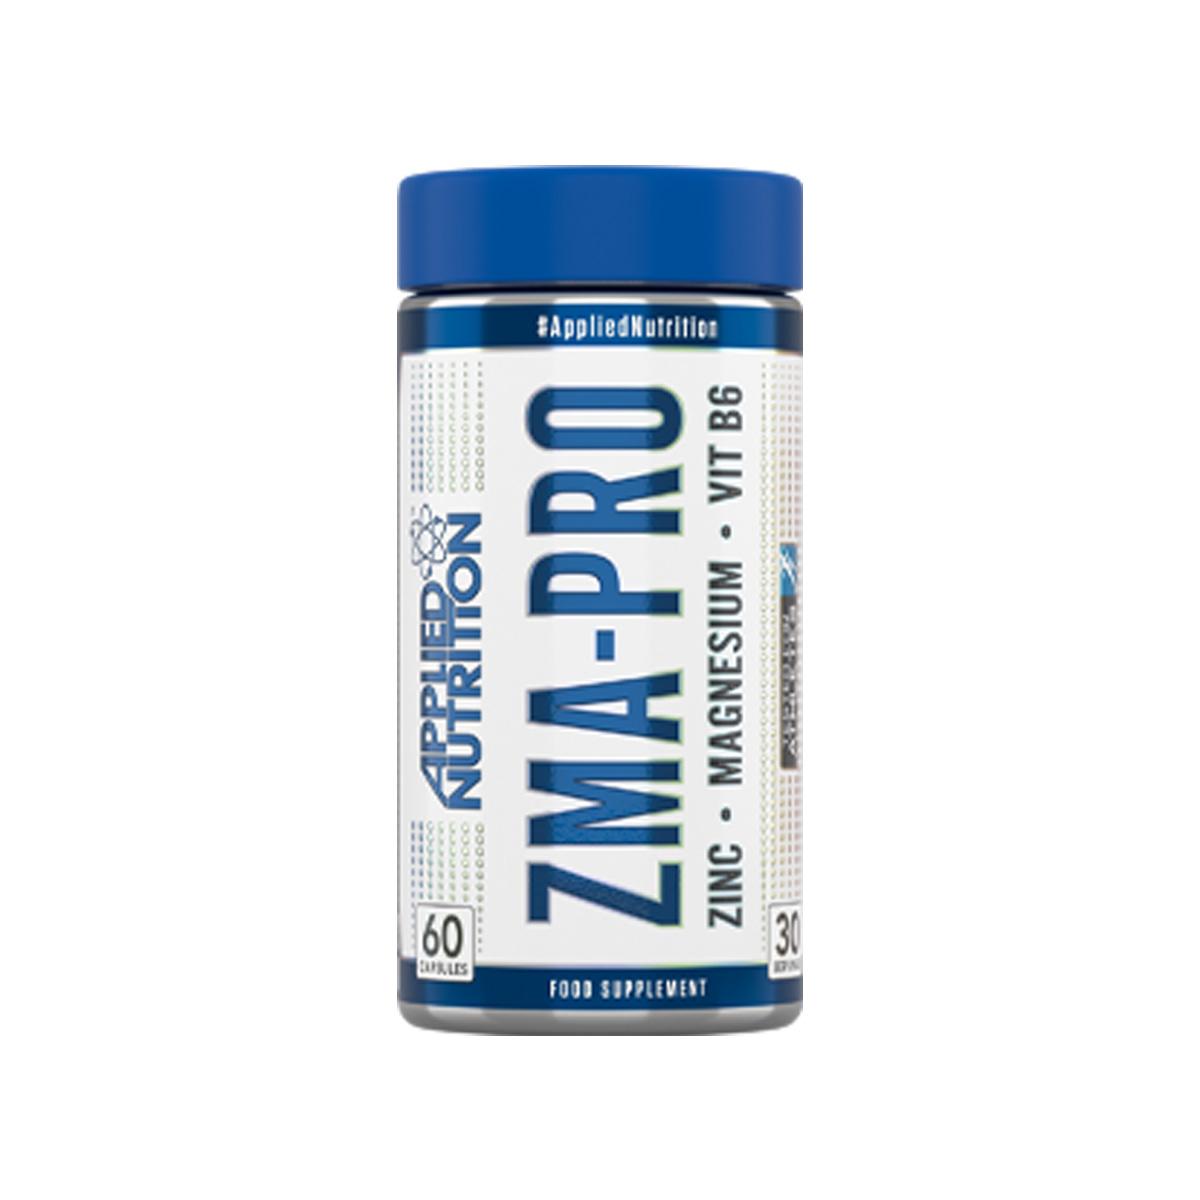 Selected image for APPLIED NUTRITION ZMA Pro kapsule 60/1